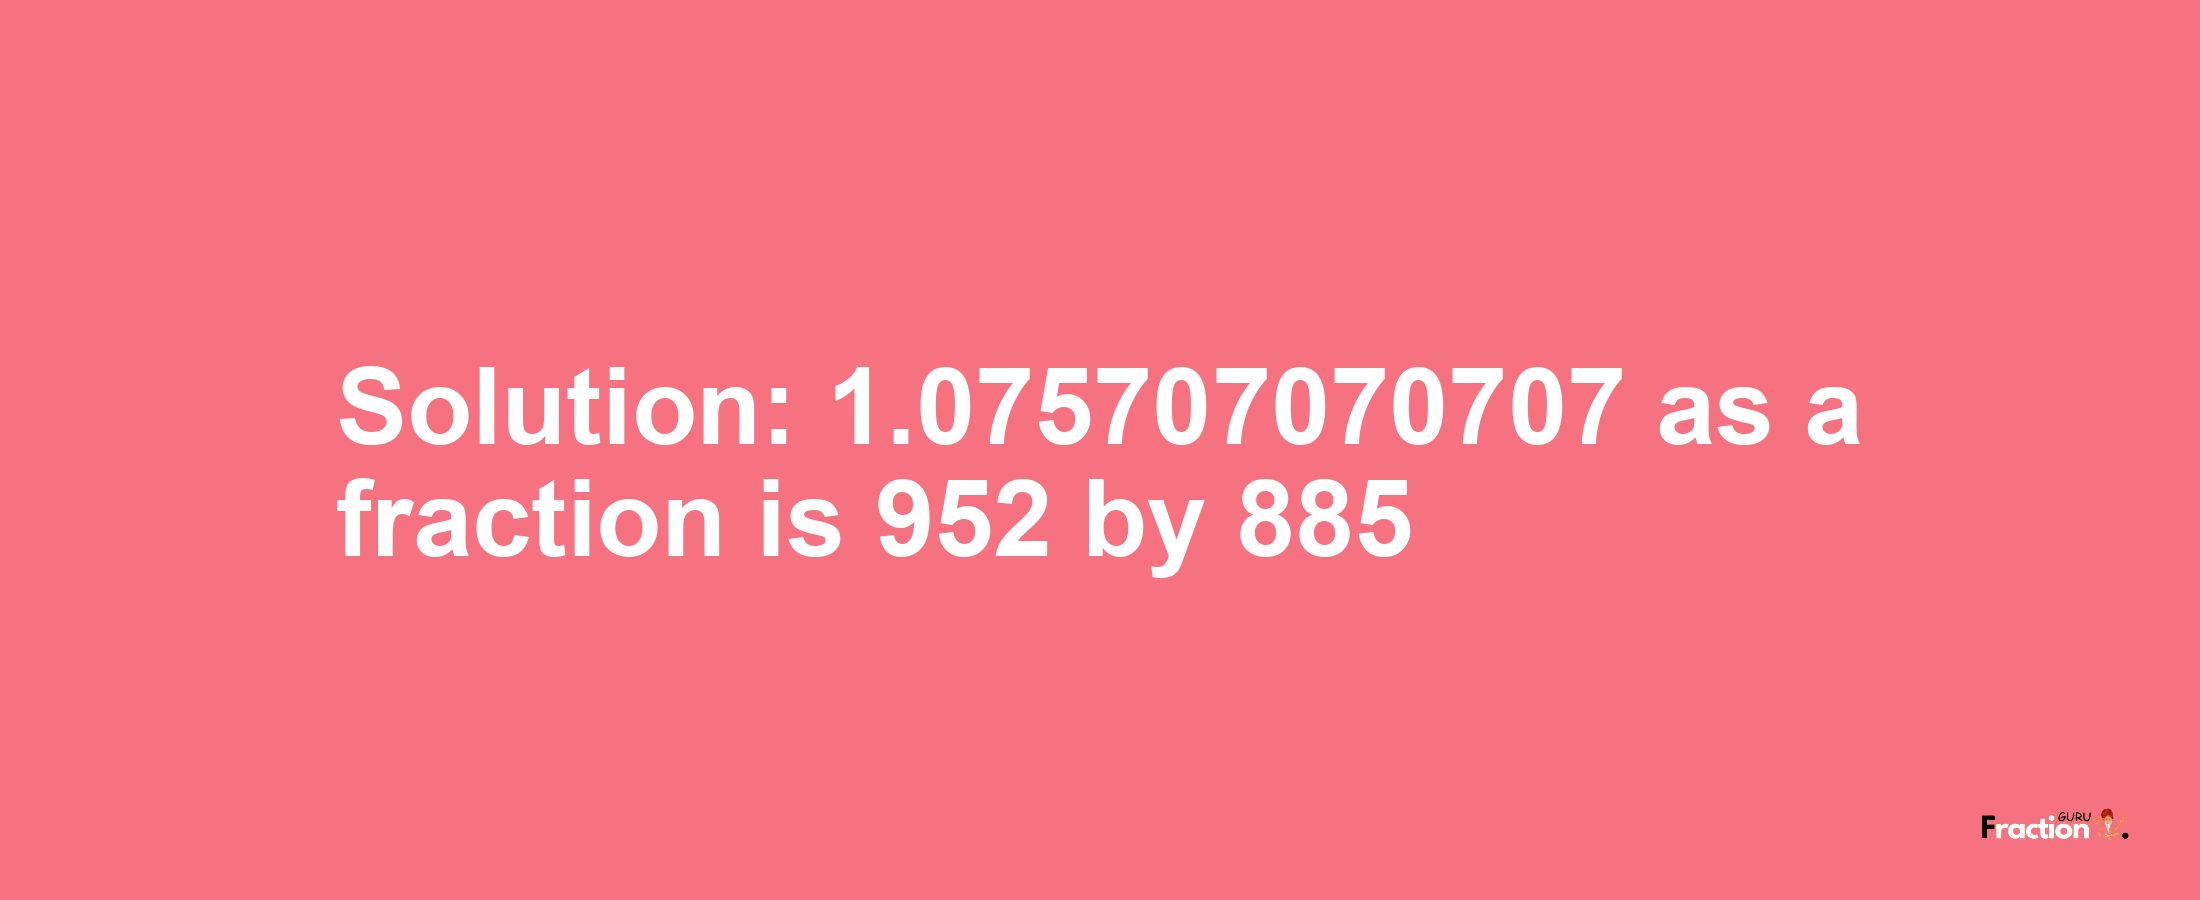 Solution:1.075707070707 as a fraction is 952/885